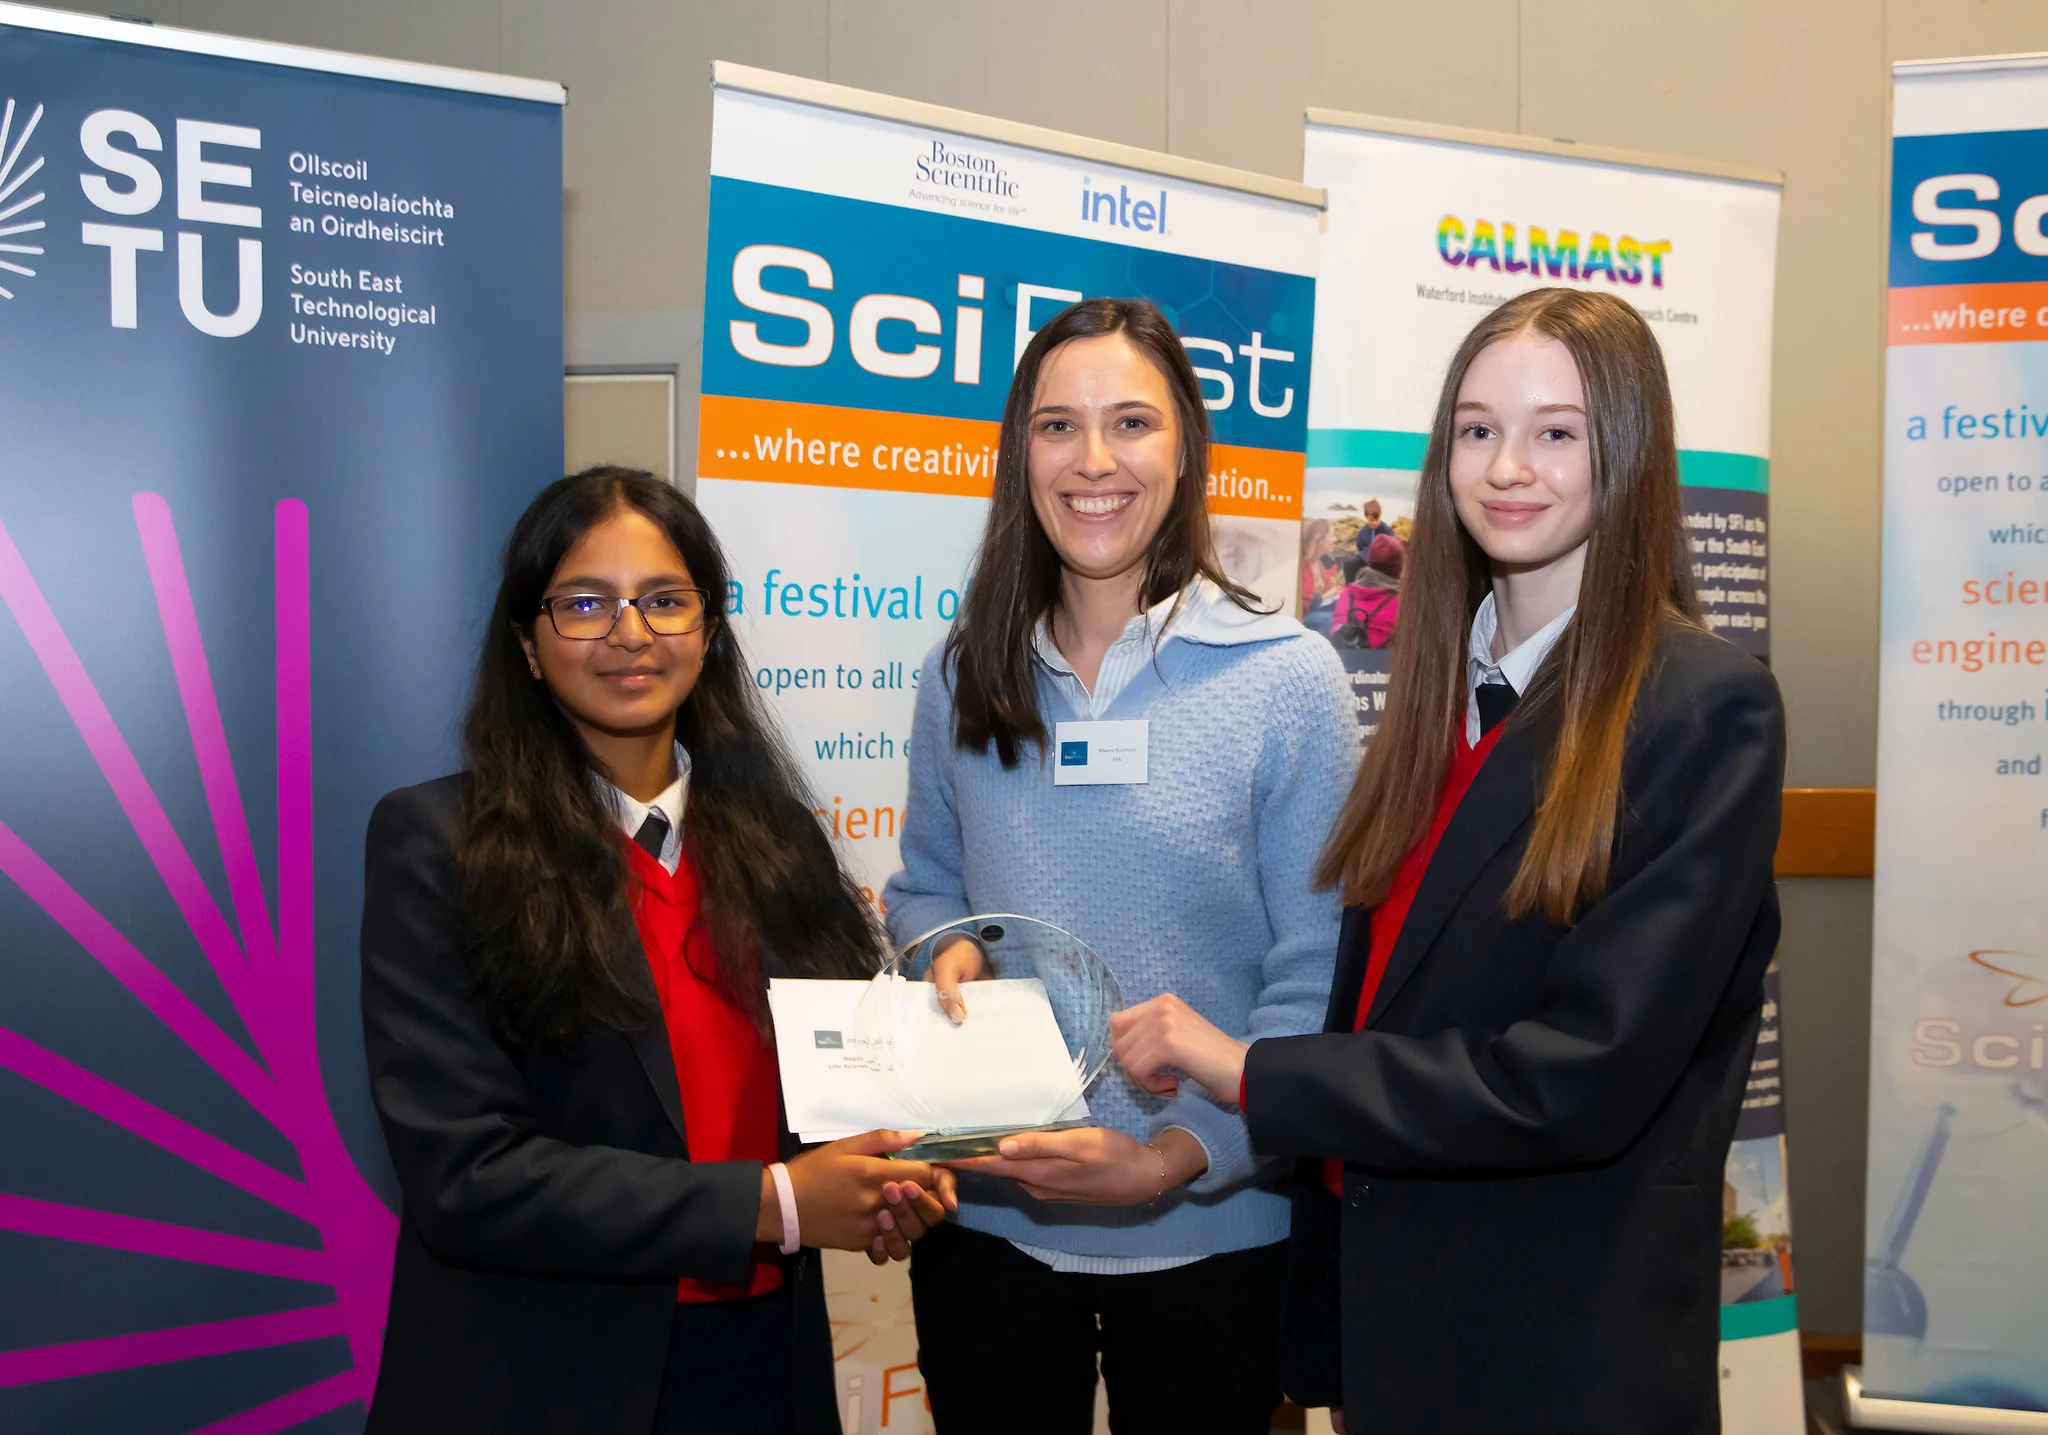 A plaque awarded to two students on their uniform at the SciFest in South East Technological University, one of the best universities in Ireland